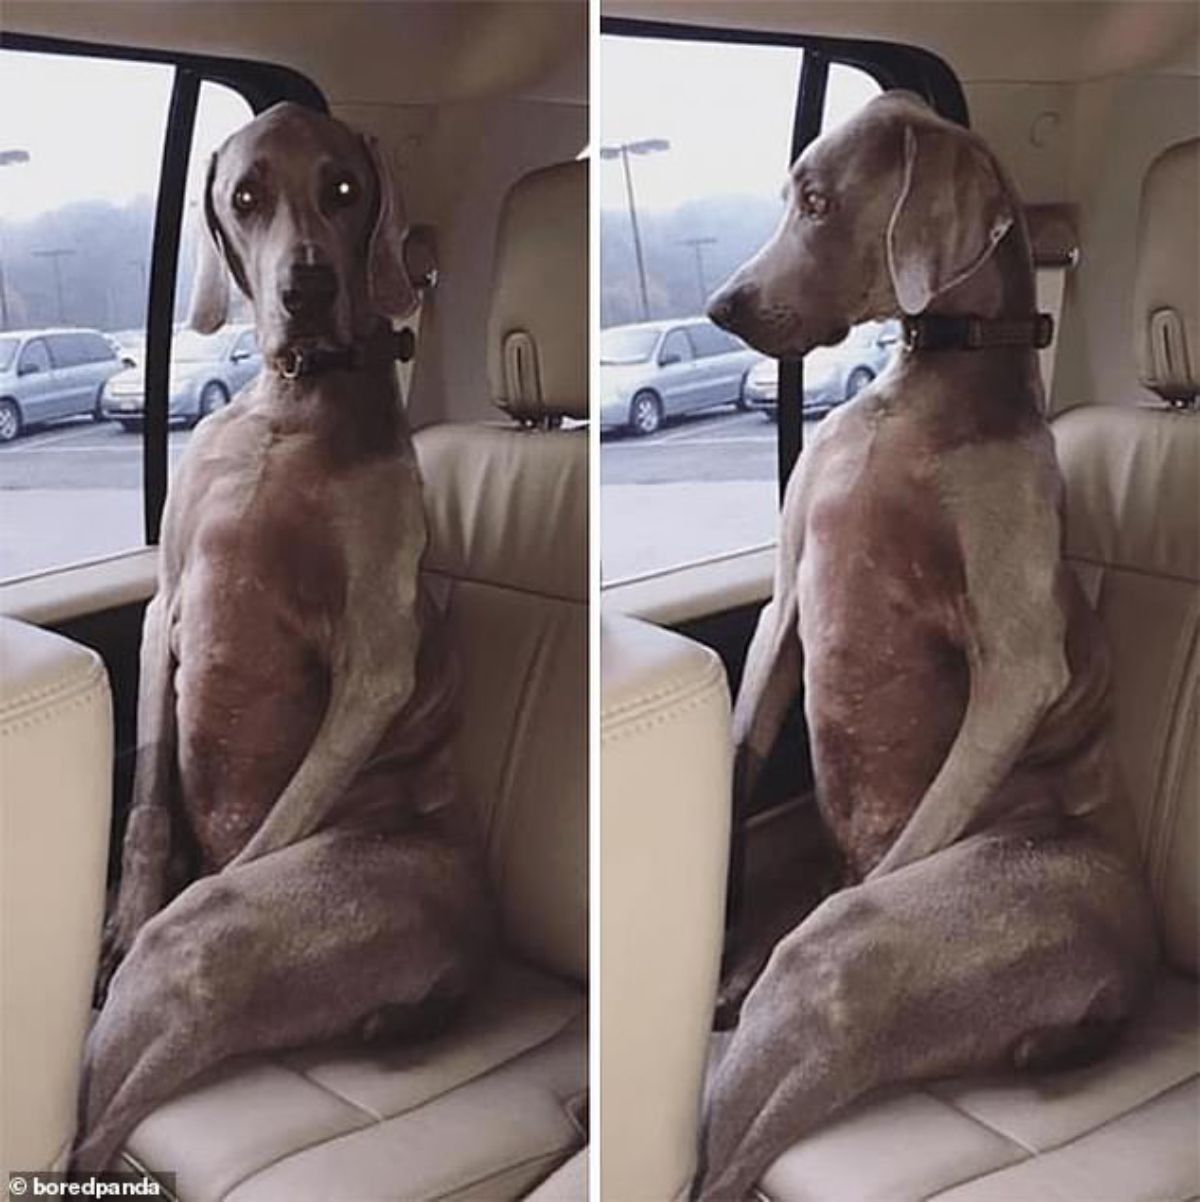 2 photos of a grey great dane sitting up in the backseat of a vehicle